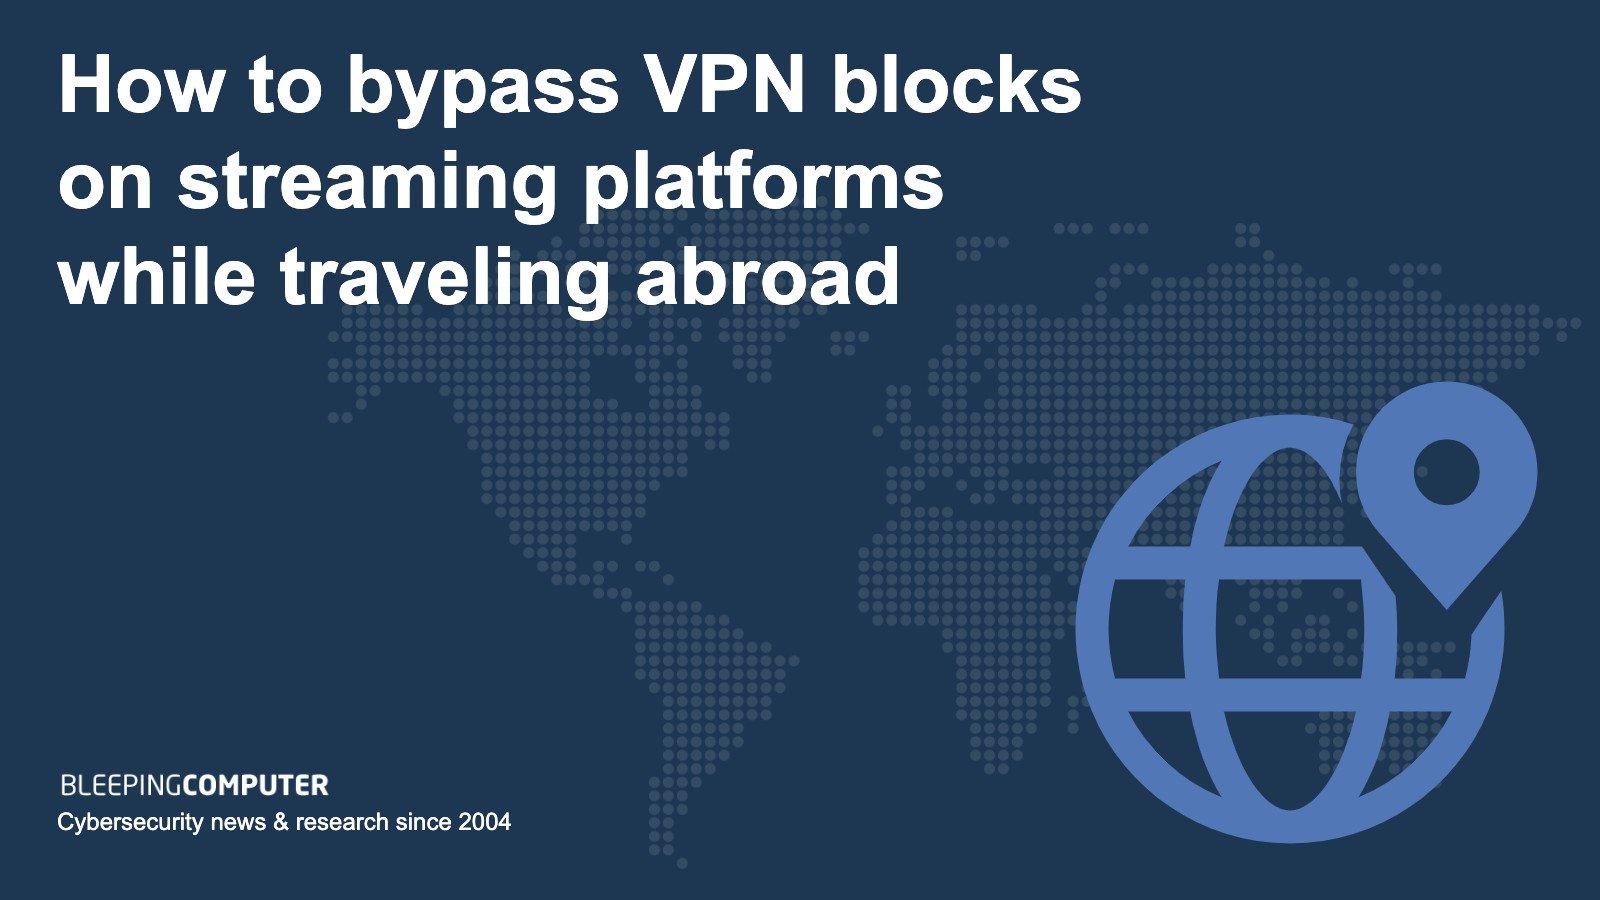 How to Get Free Internet by Using vpn? How to bypass VPN blocks on streaming platforms while traveling abroad